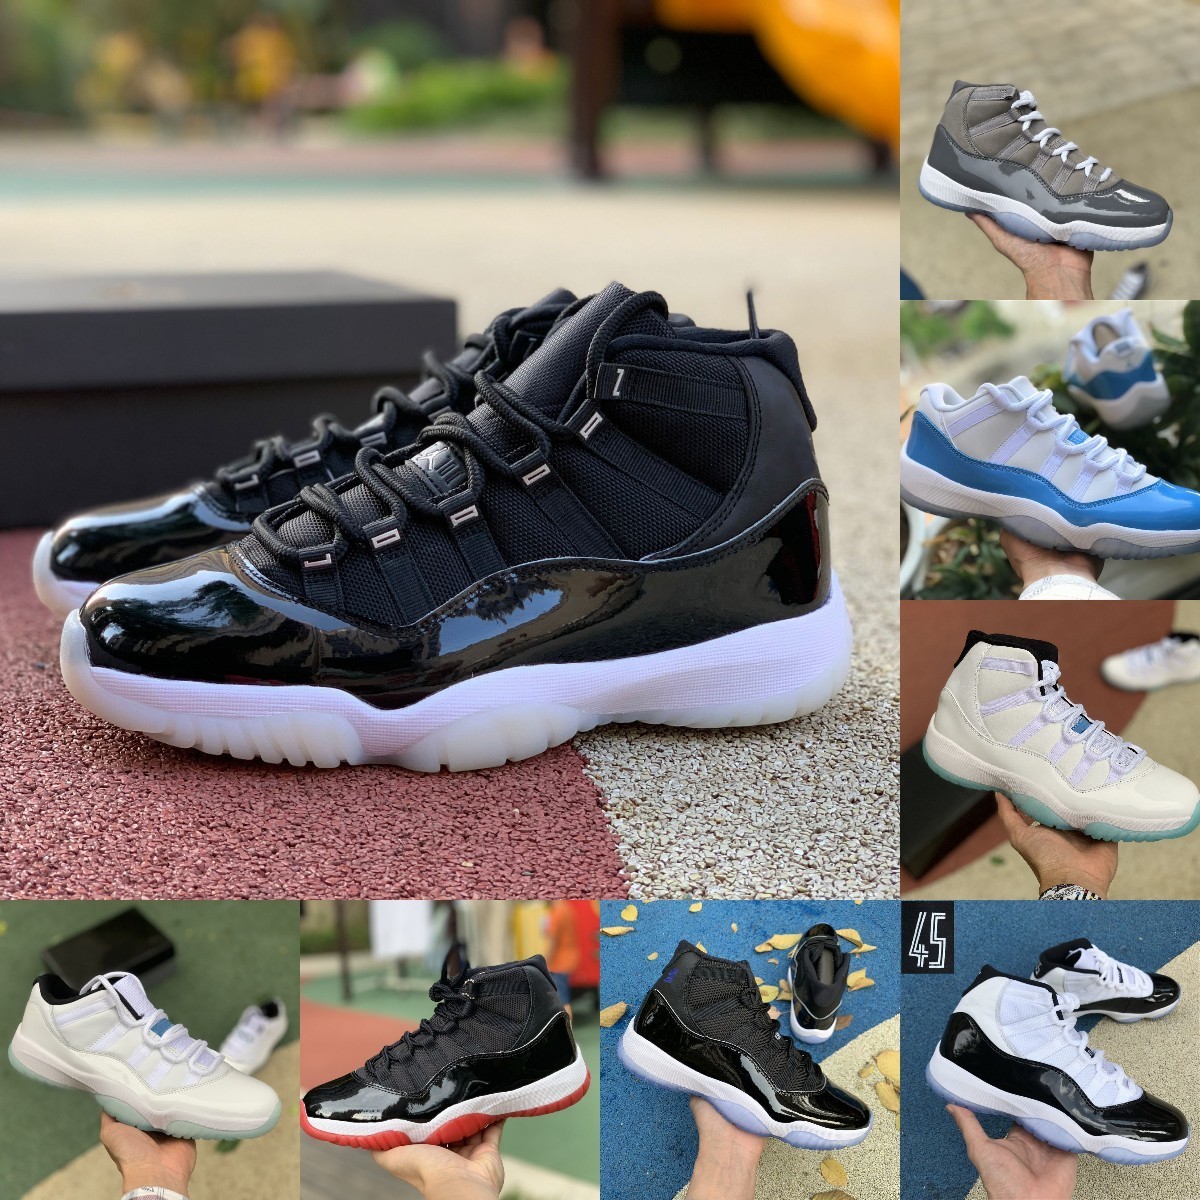 

Jumpman Jubilee 11 11s High Basketball Shoes COOL GREY Legend Blue Playoffs Bred Space Jam Gamma Blue Easter Concord 45 Low Columbia White Red Trainer Sneakers, Please contact us